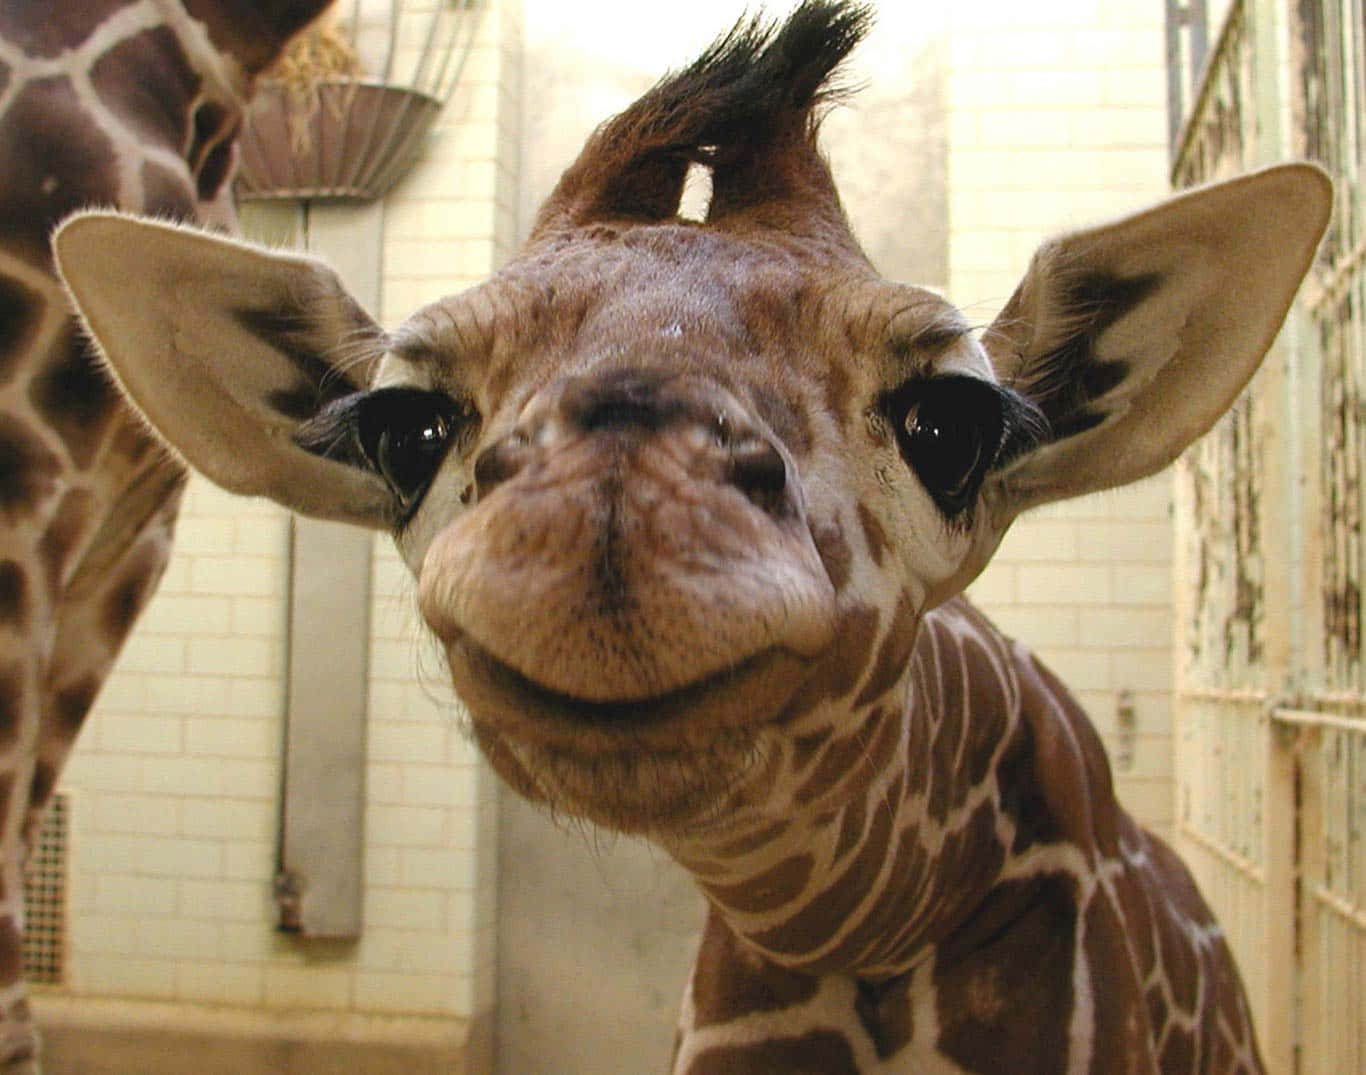 A Baby Giraffe Is Standing In A Zoo